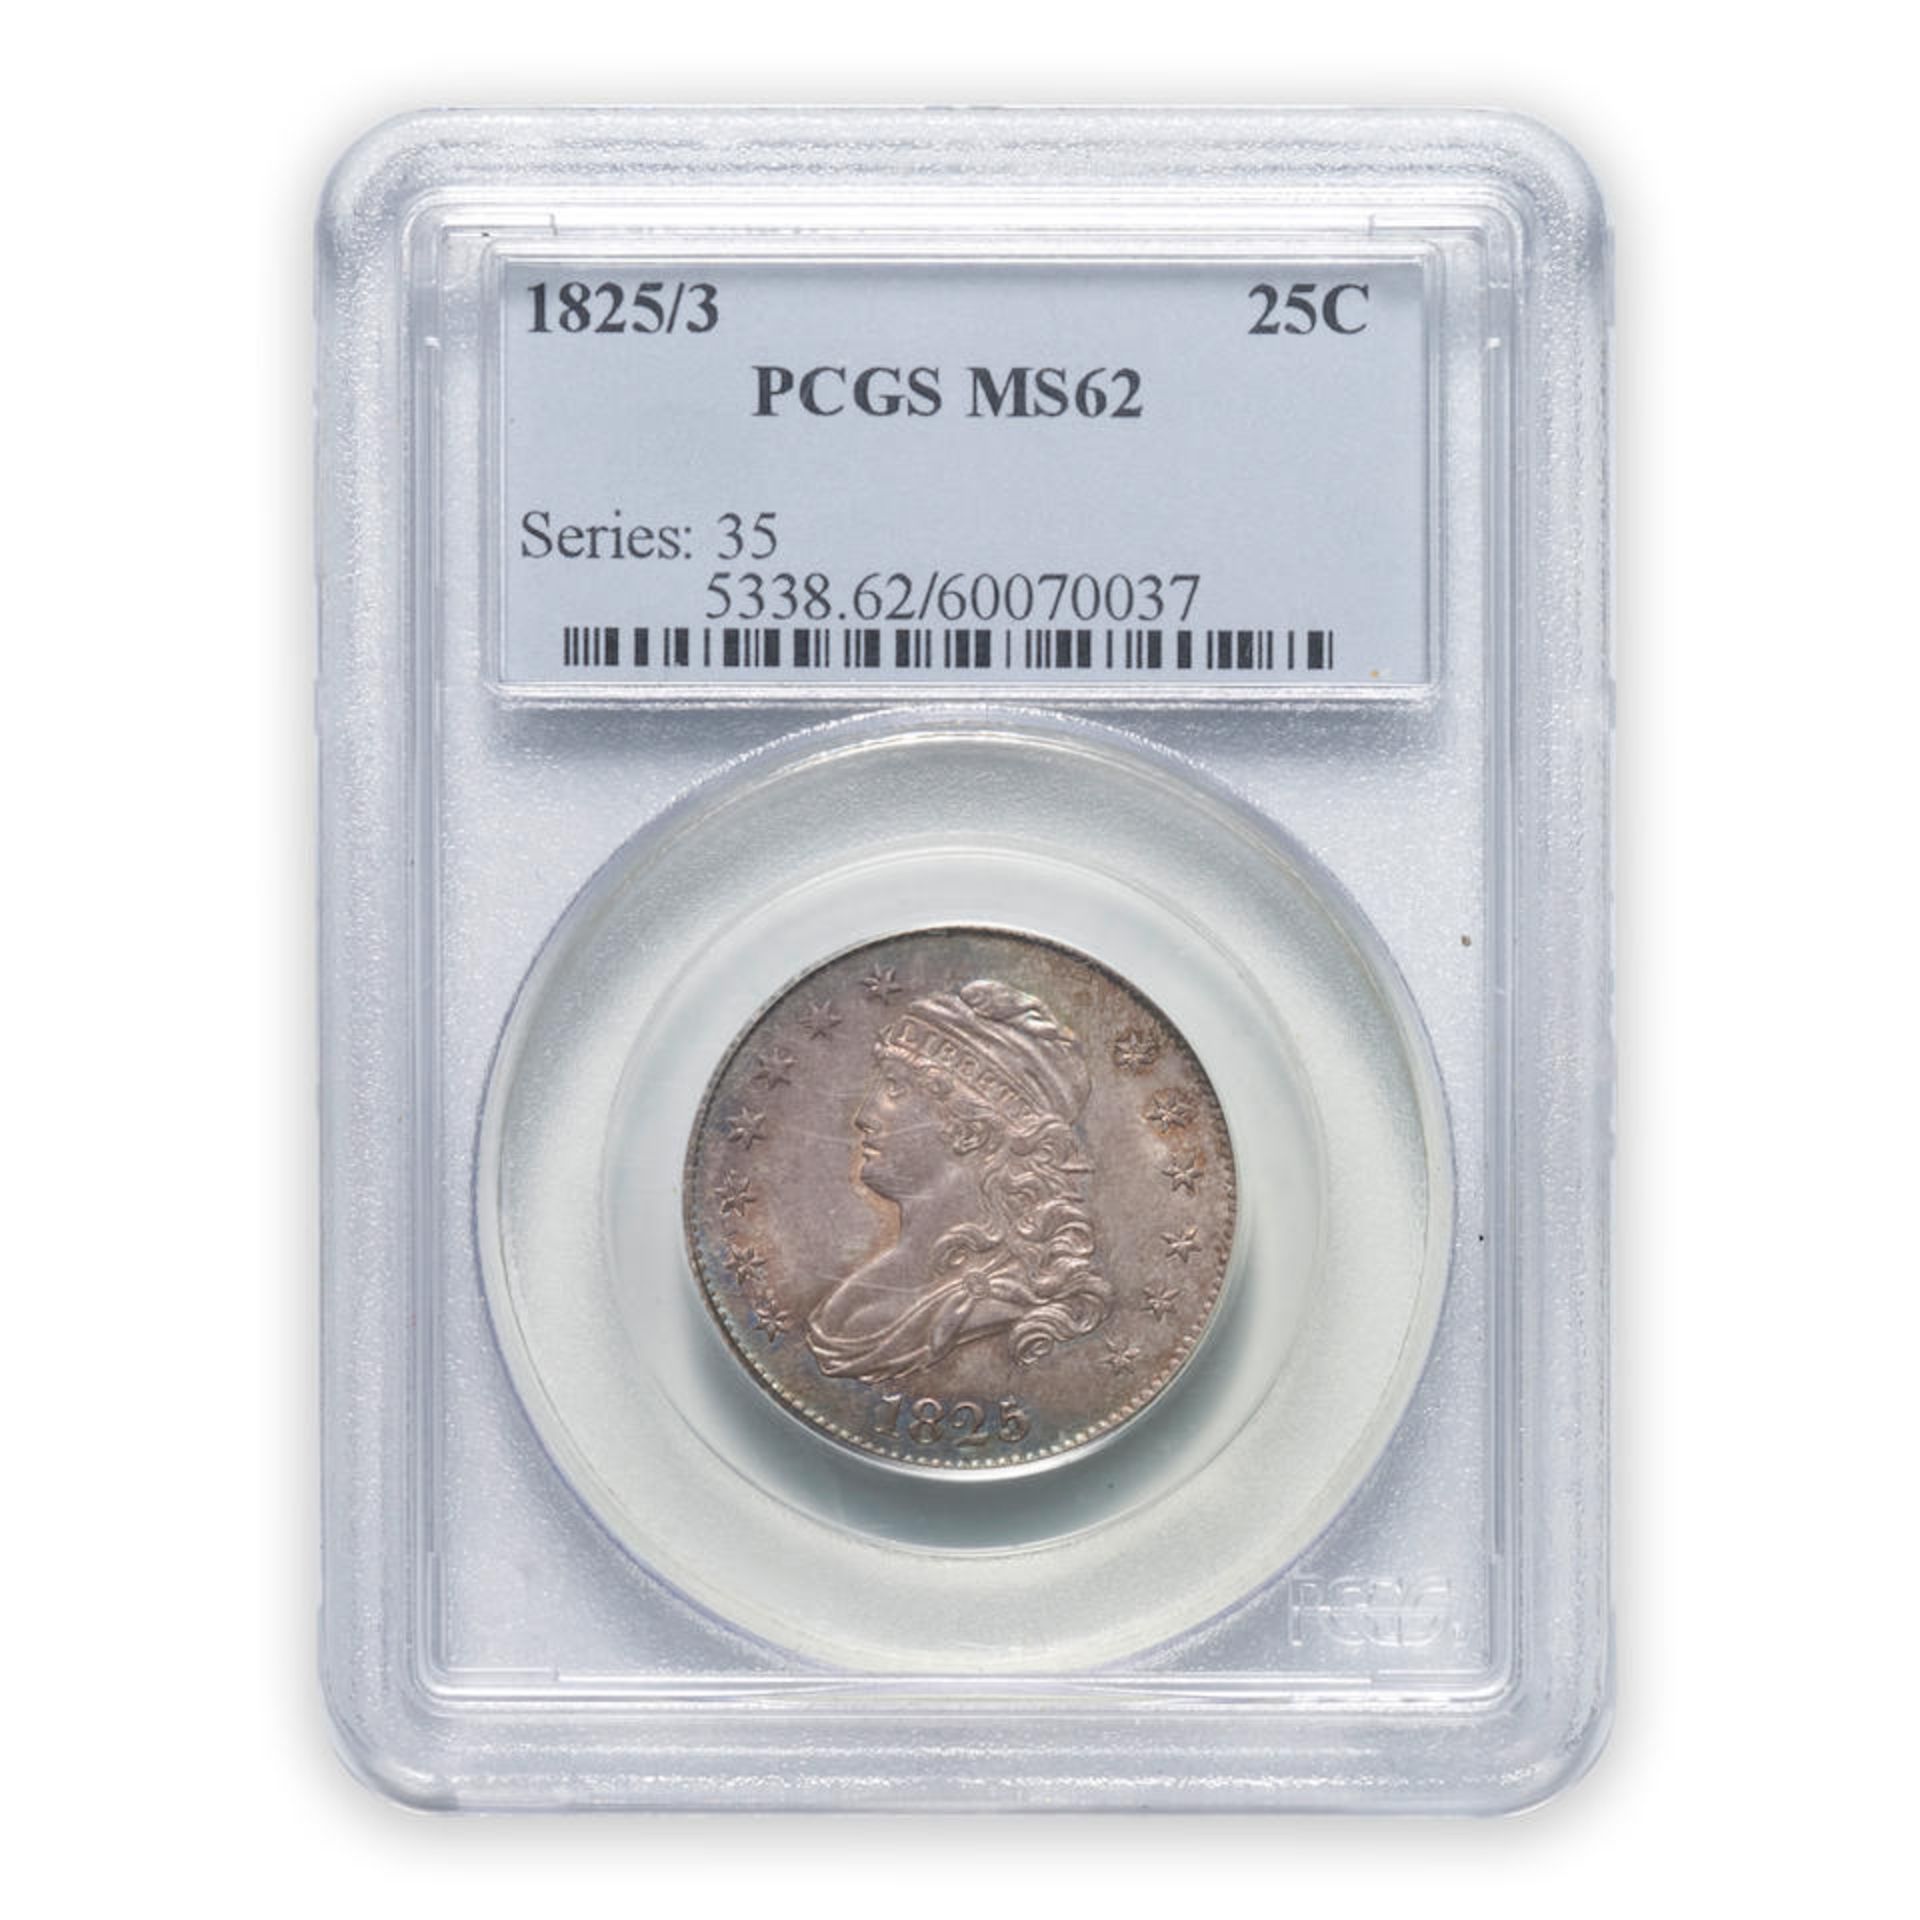 United States 1825/3 Capped Bust Quarter.